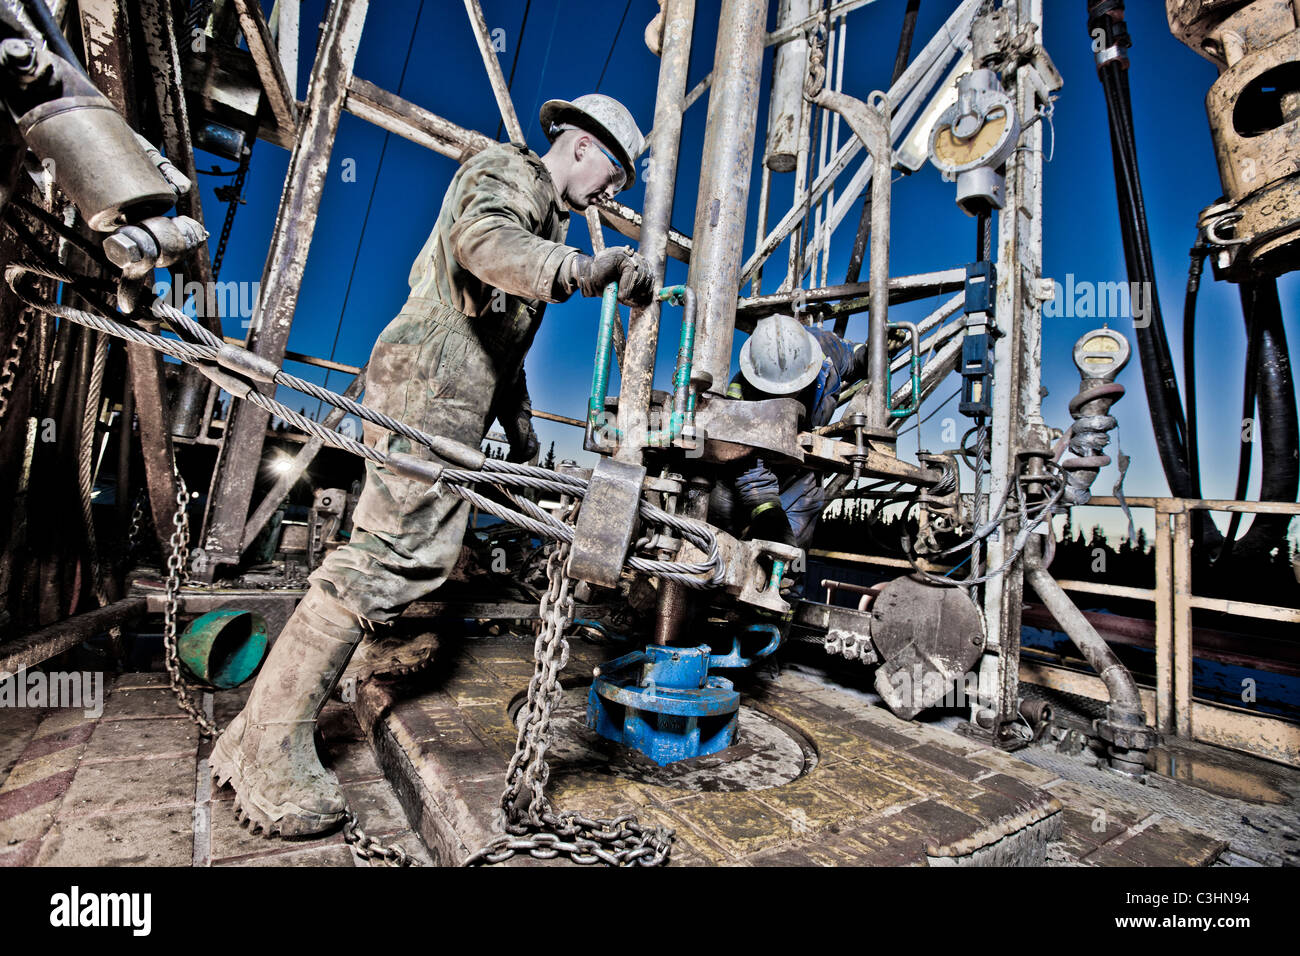 Oil workers using oil drill Stock Photo